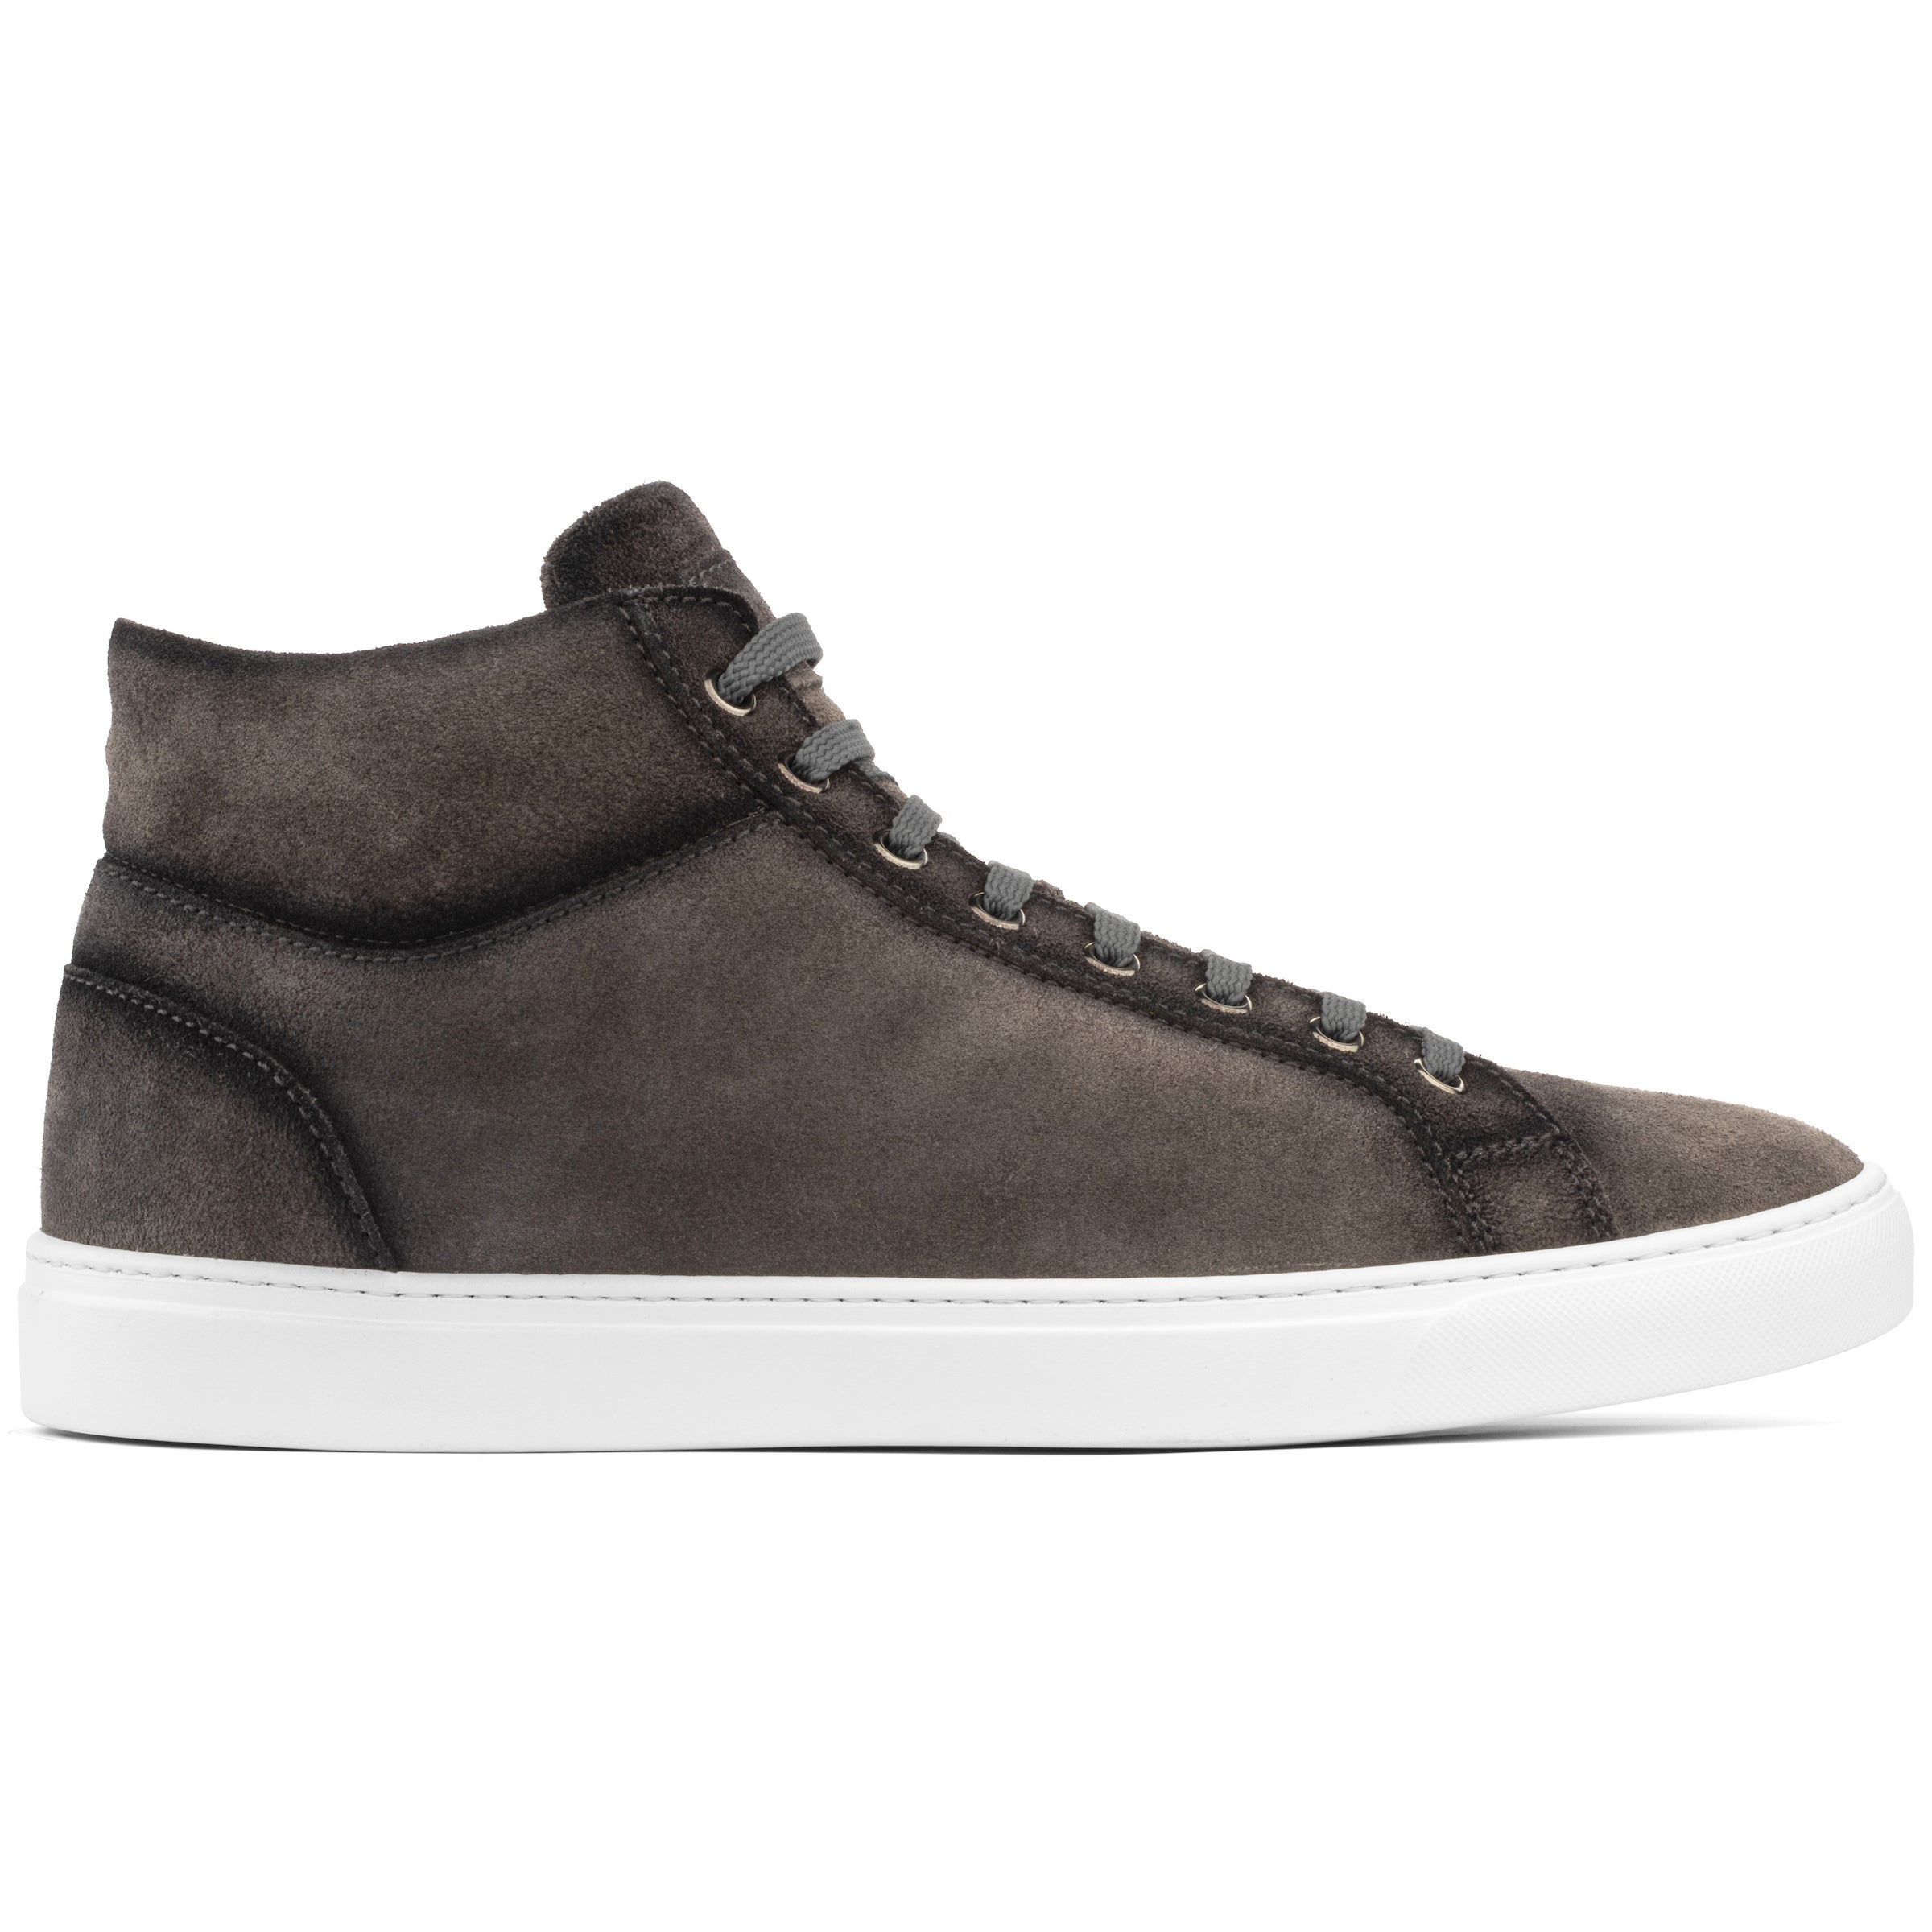 Luther Grey Aero Suede High Top Sneaker